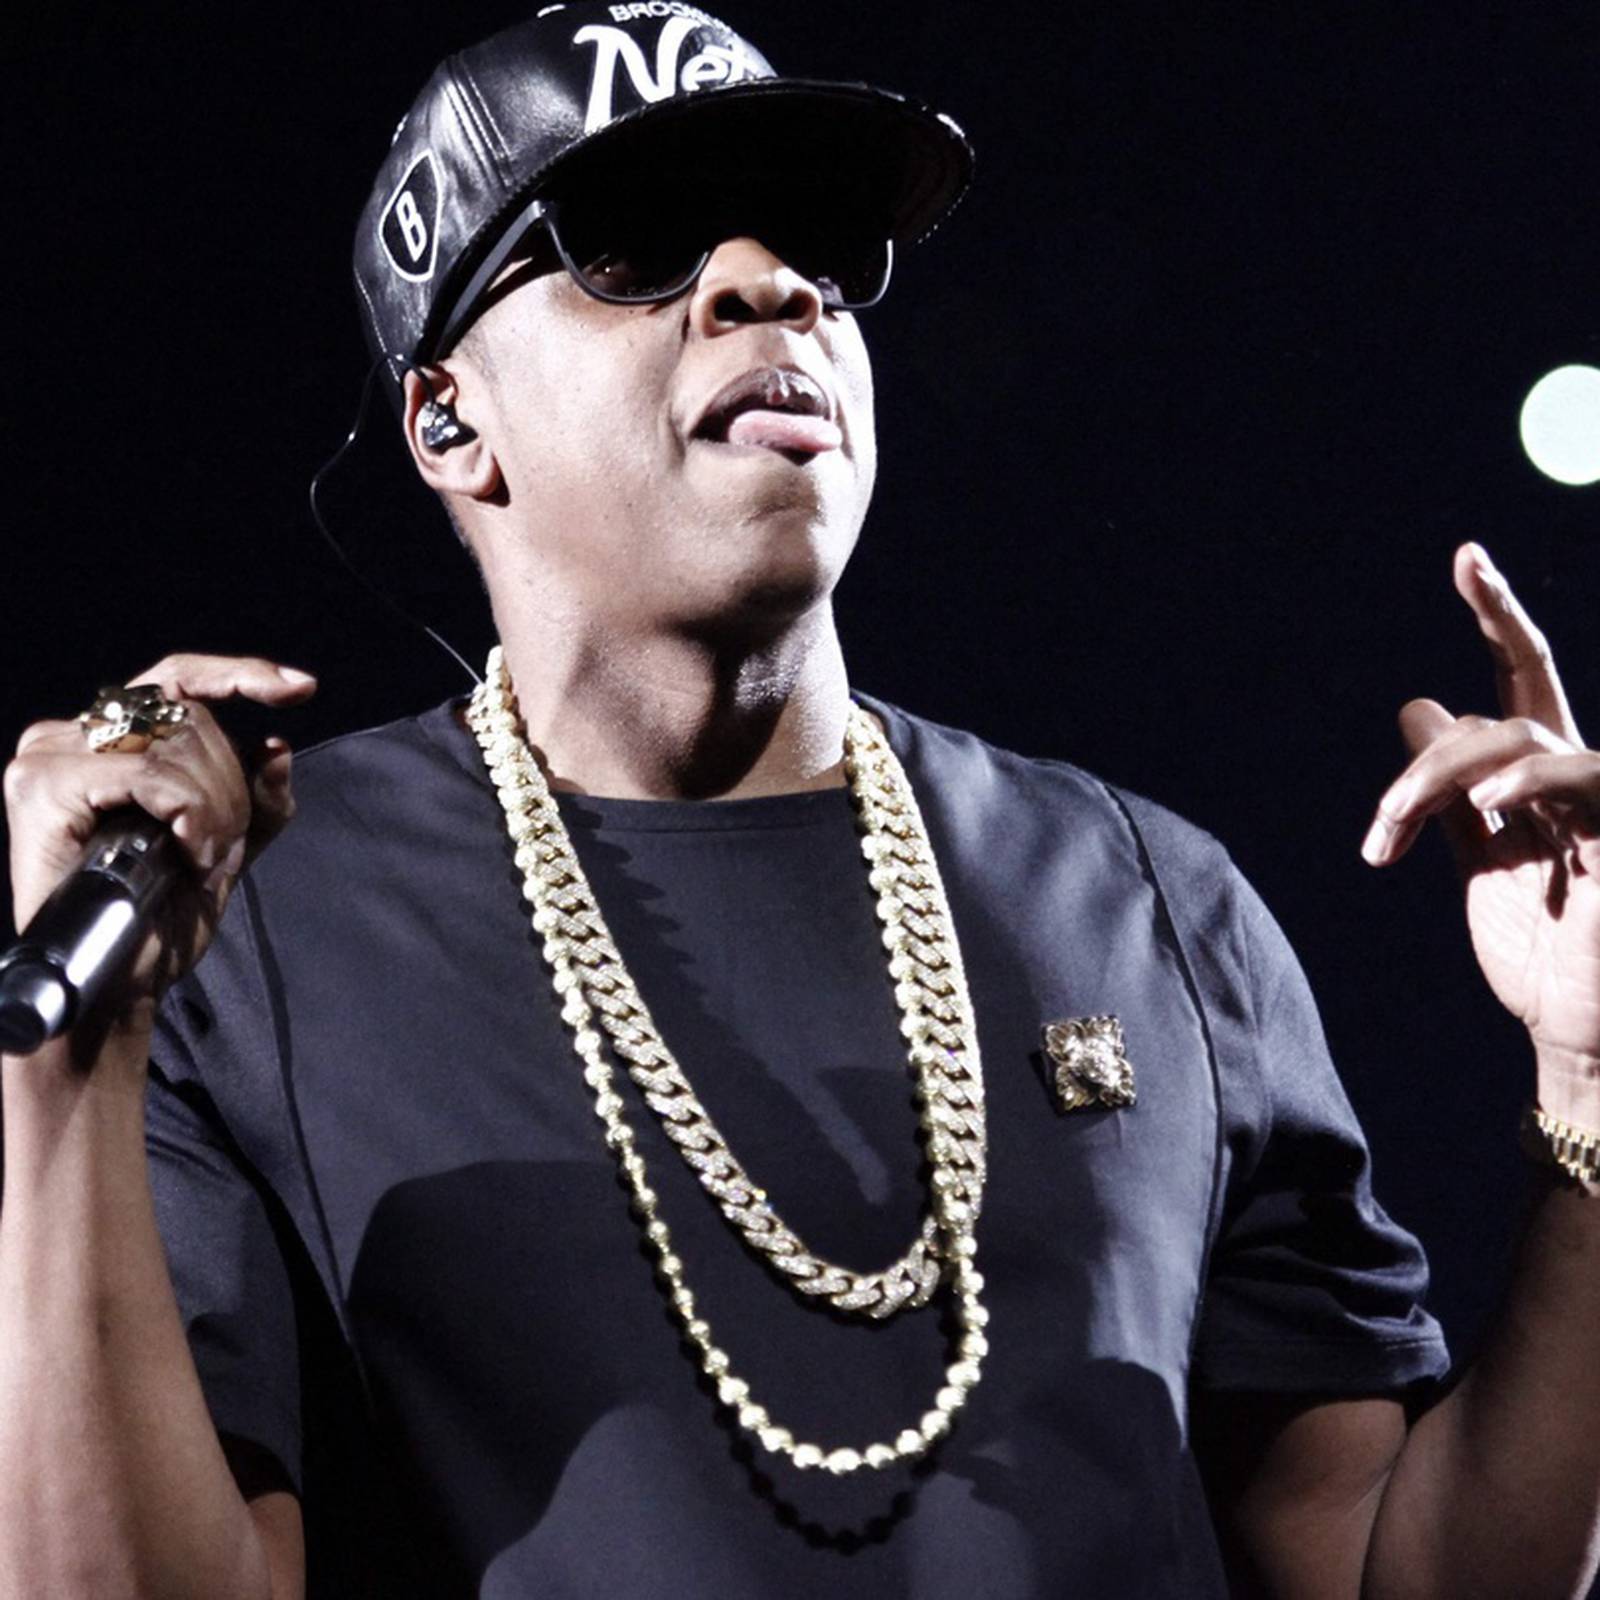 LVMH Moët Hennessy Louis Vuitton purchases stake in Jay-Z's